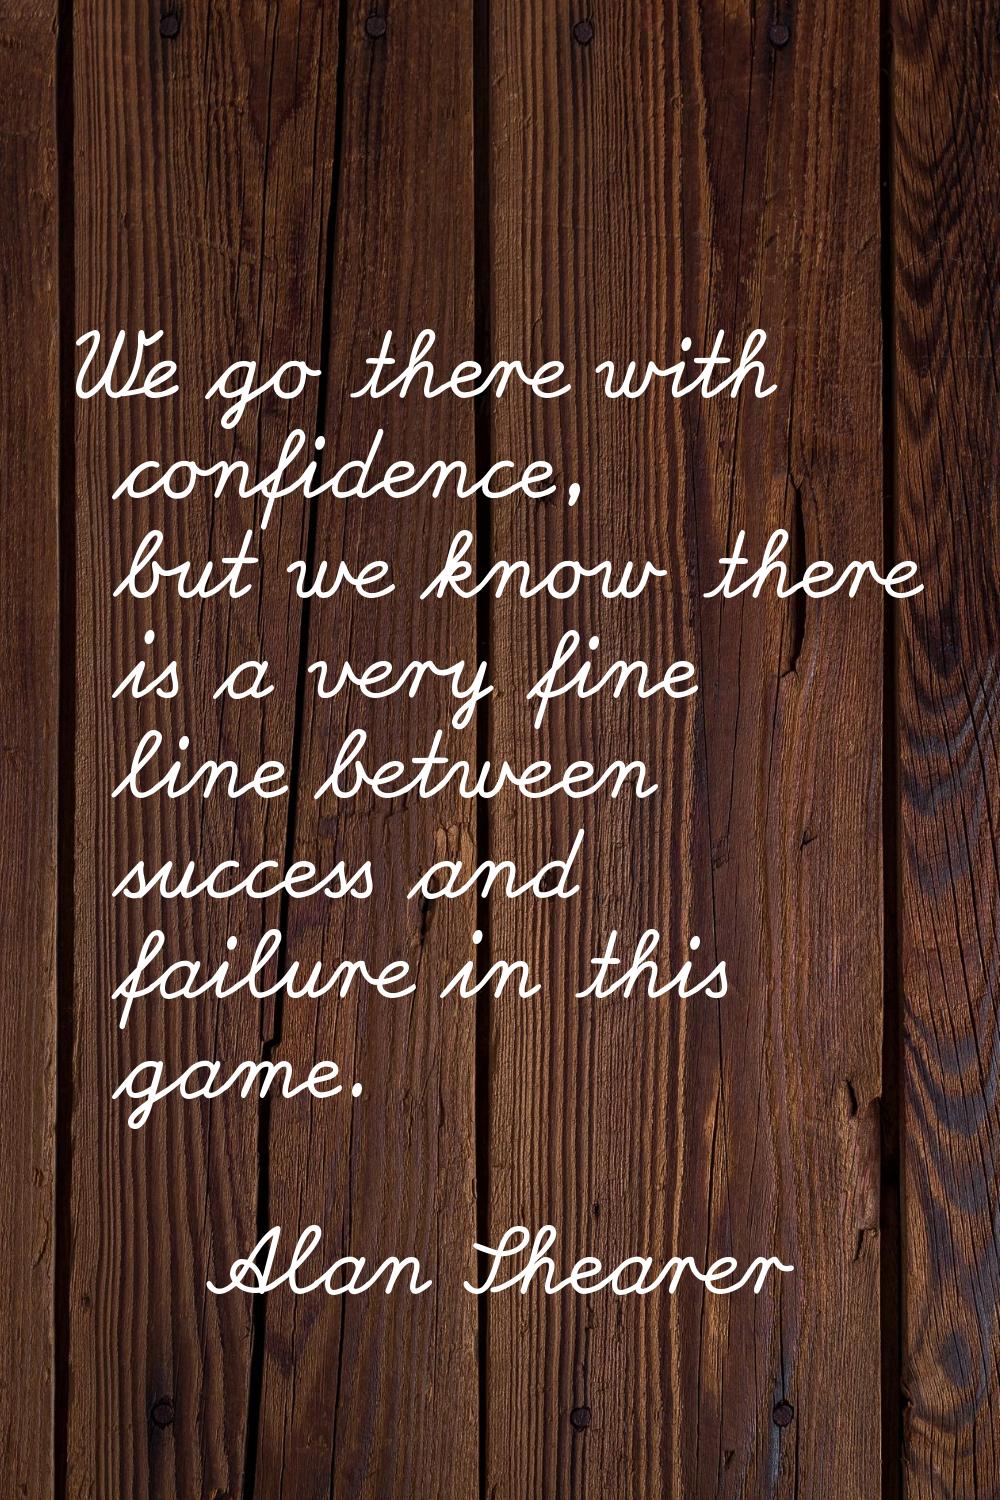 We go there with confidence, but we know there is a very fine line between success and failure in t